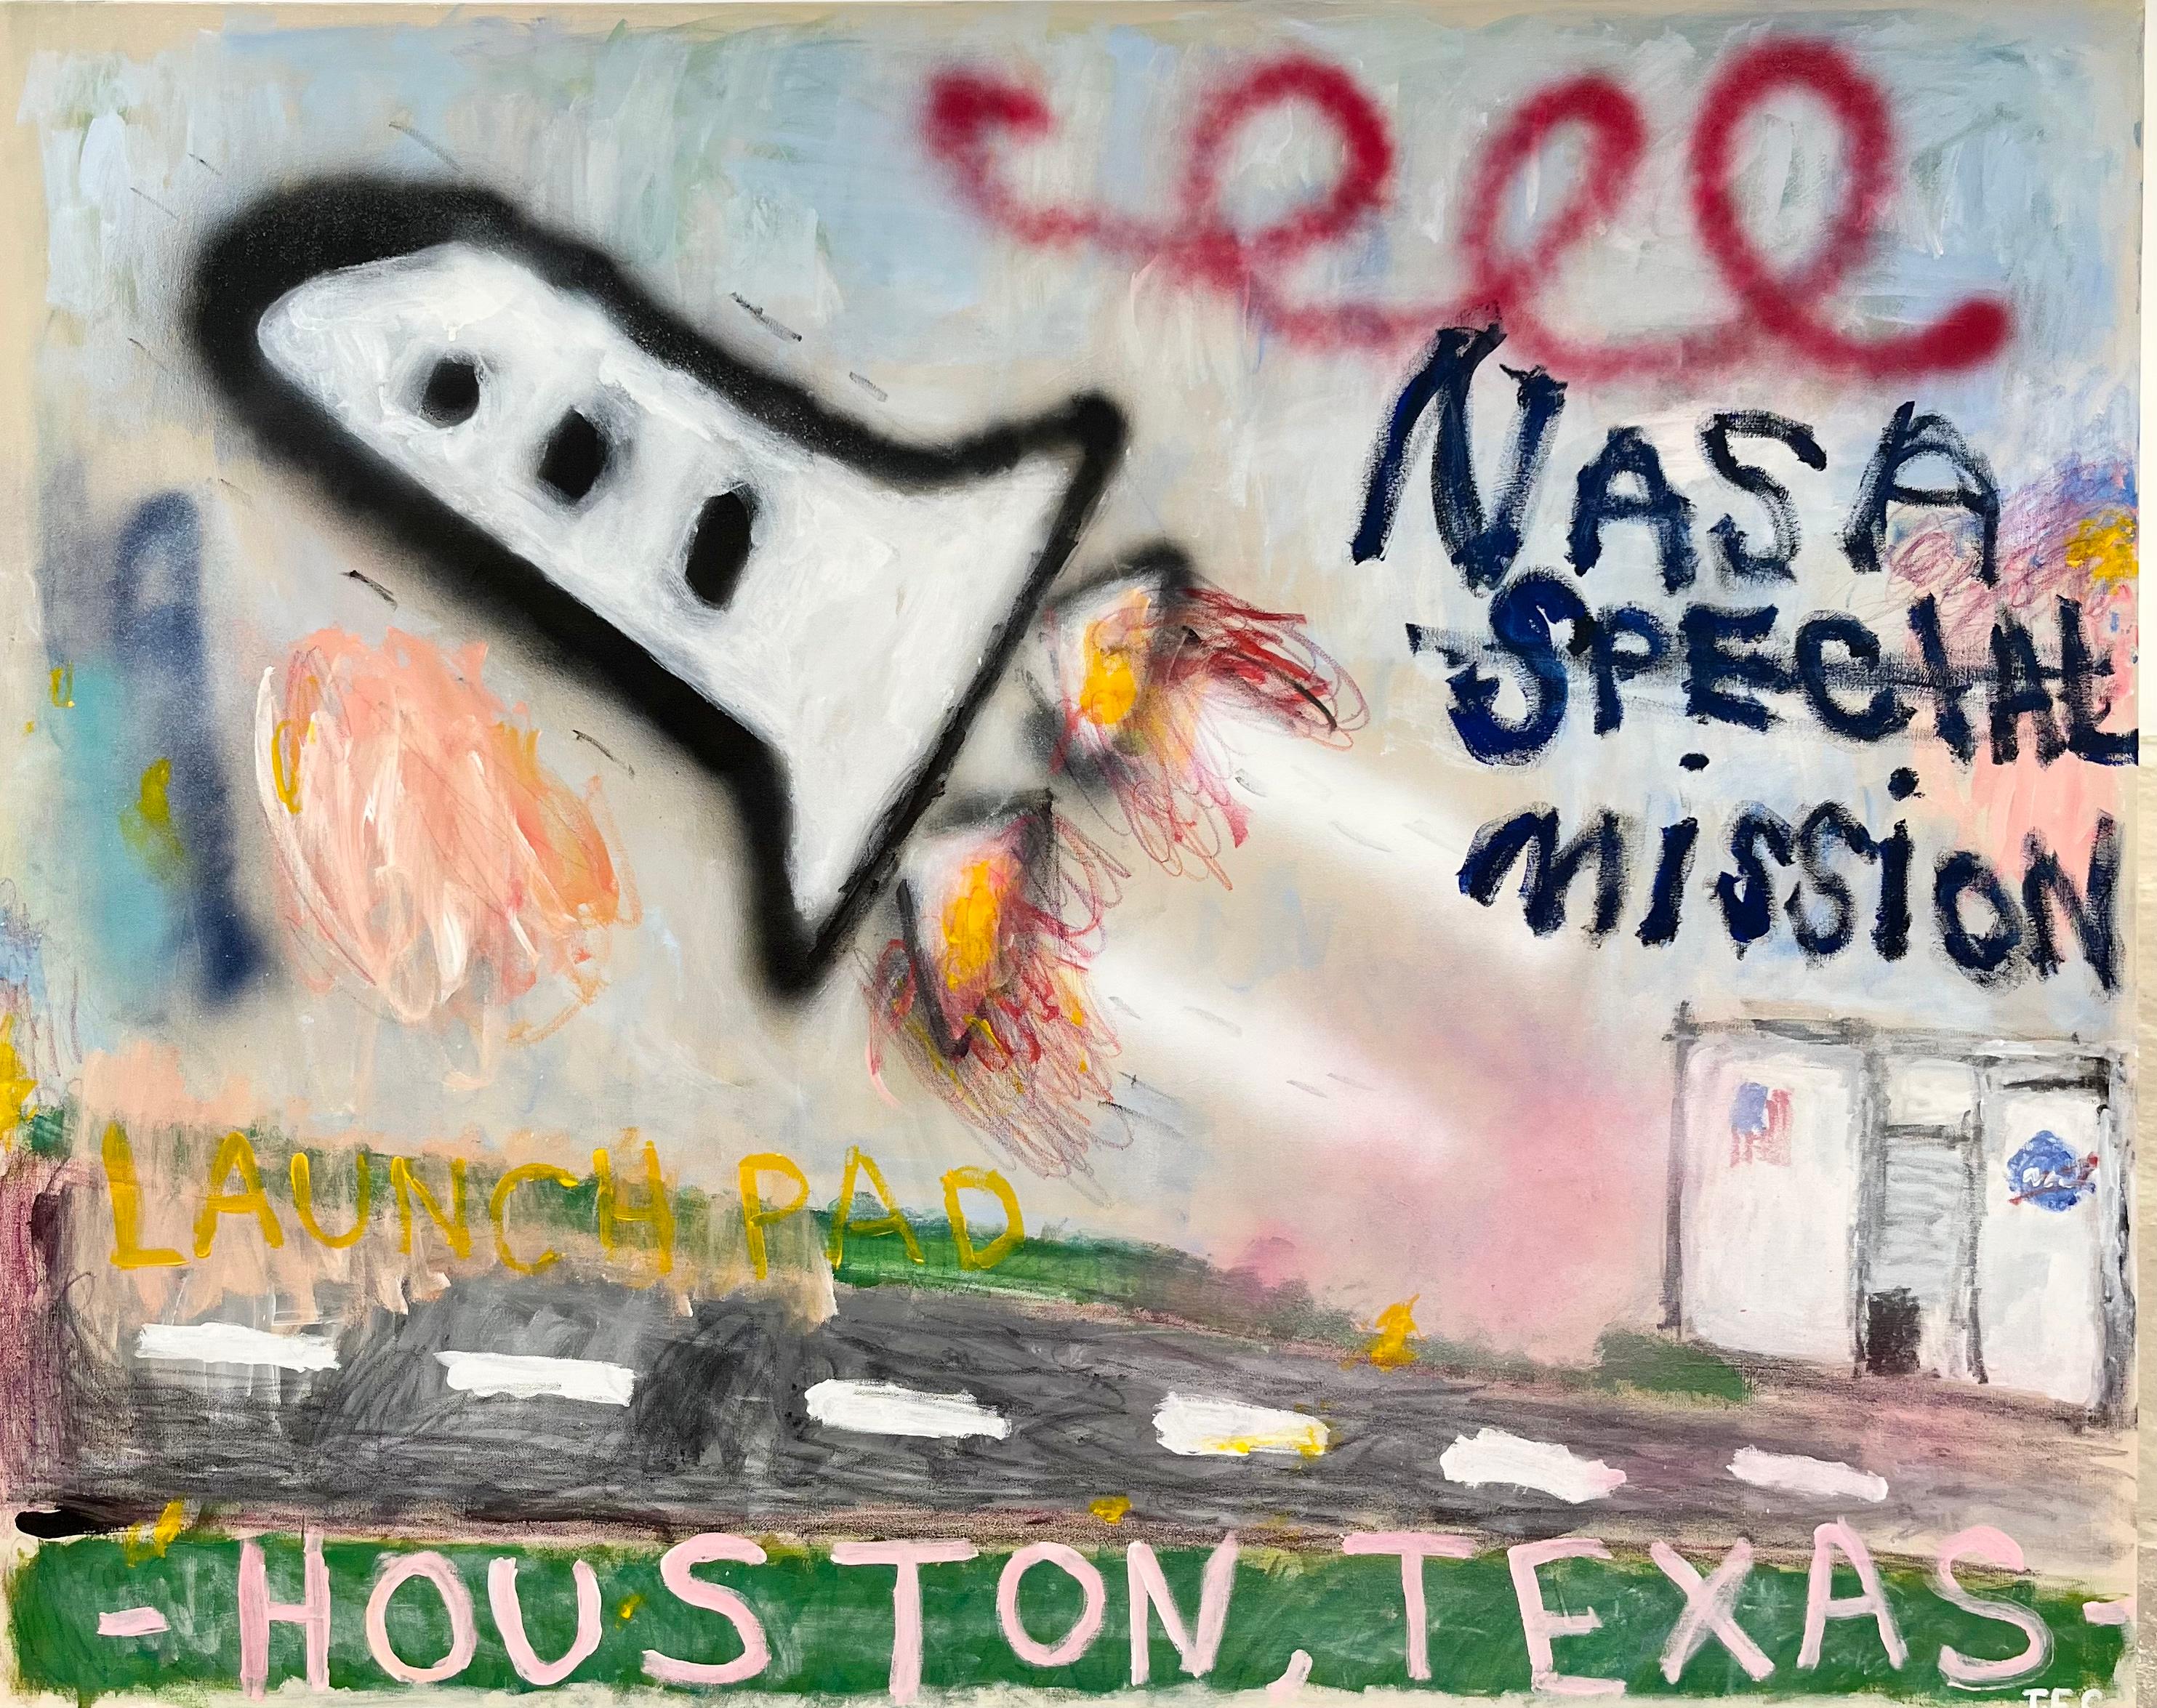 Tyler Casey Landscape Painting - "NASA" Contemporary Abstract Pop Art Houston, Texas Space Shuttle Painting